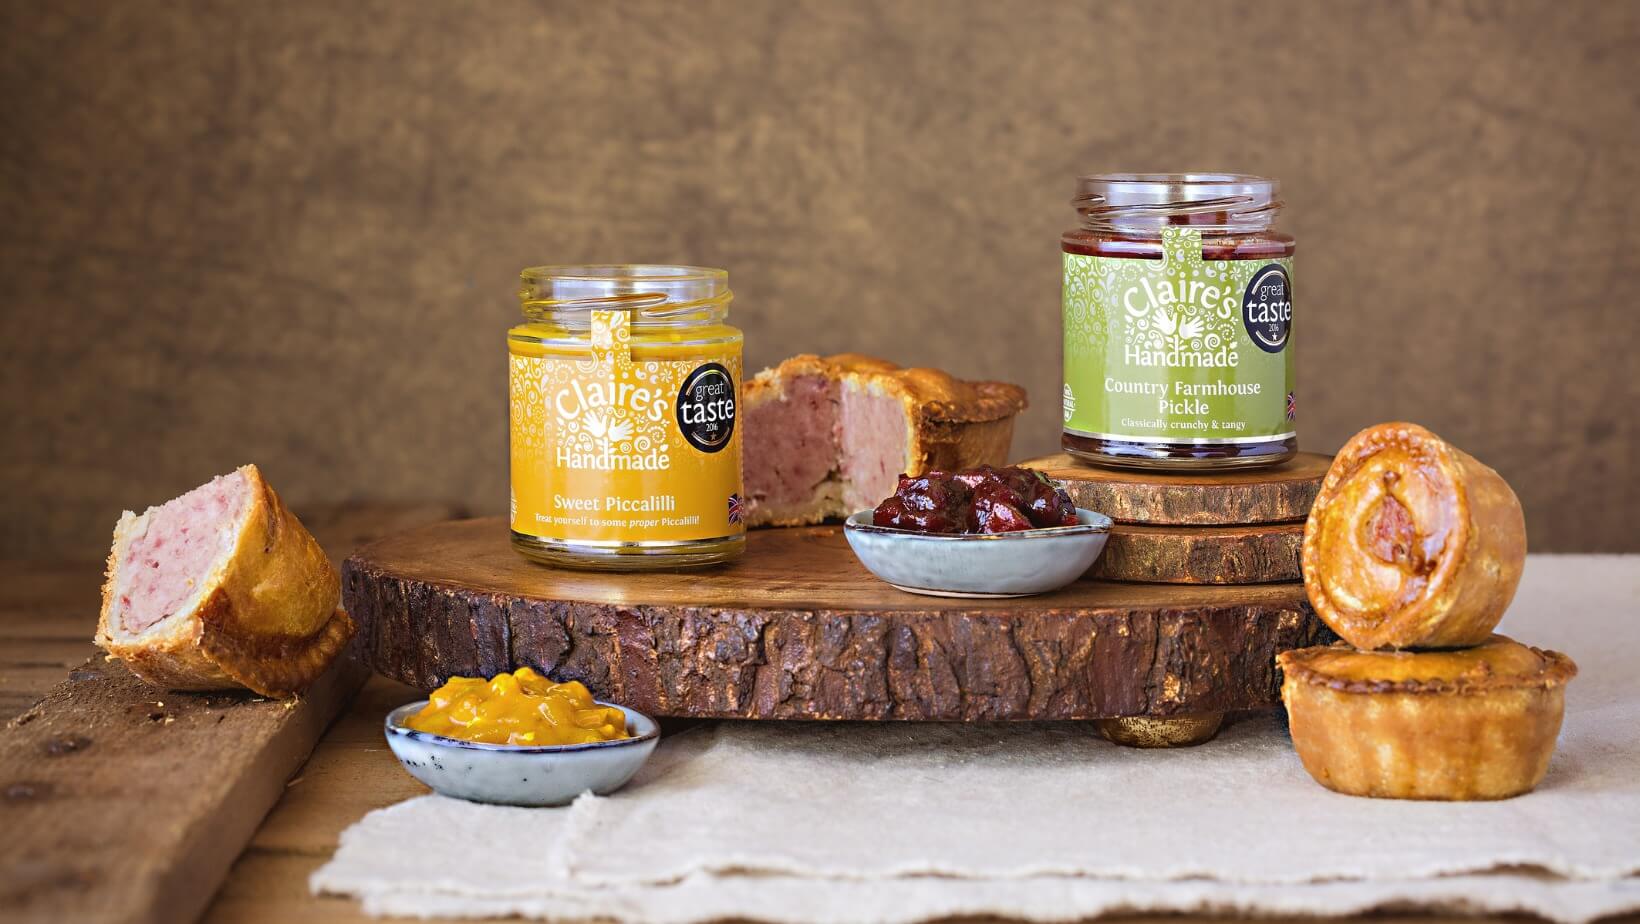 Claires Handmade Chutneys Sweet Piccalilli and pies